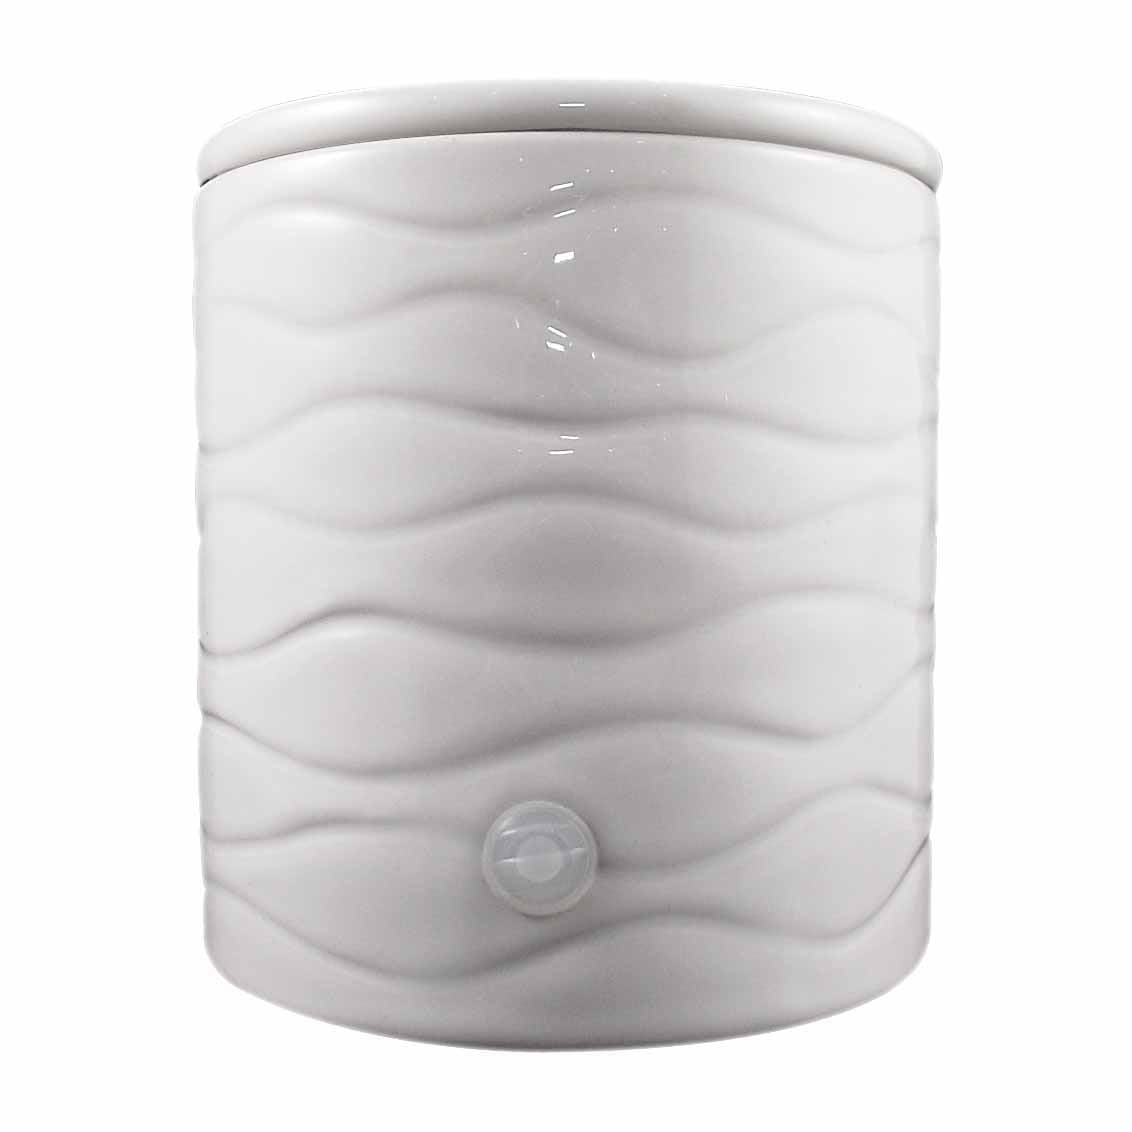 electric wax warmer with auto shut off